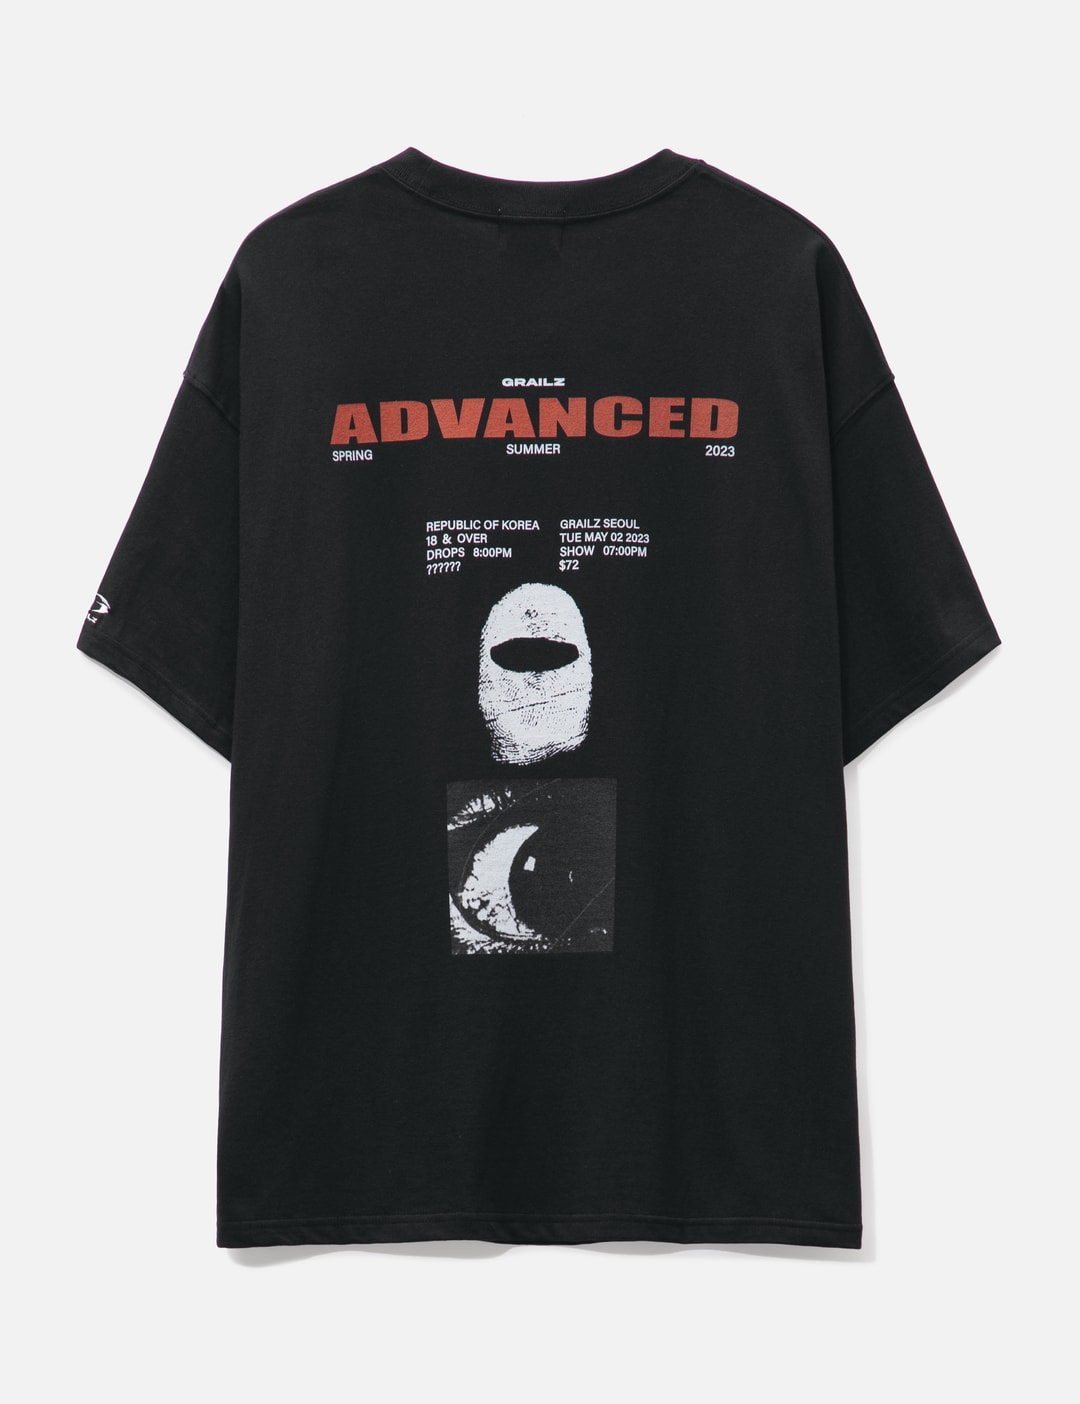 GRAILZ - Advanced Graphic T-shirt | HBX - Globally Curated Fashion and ...